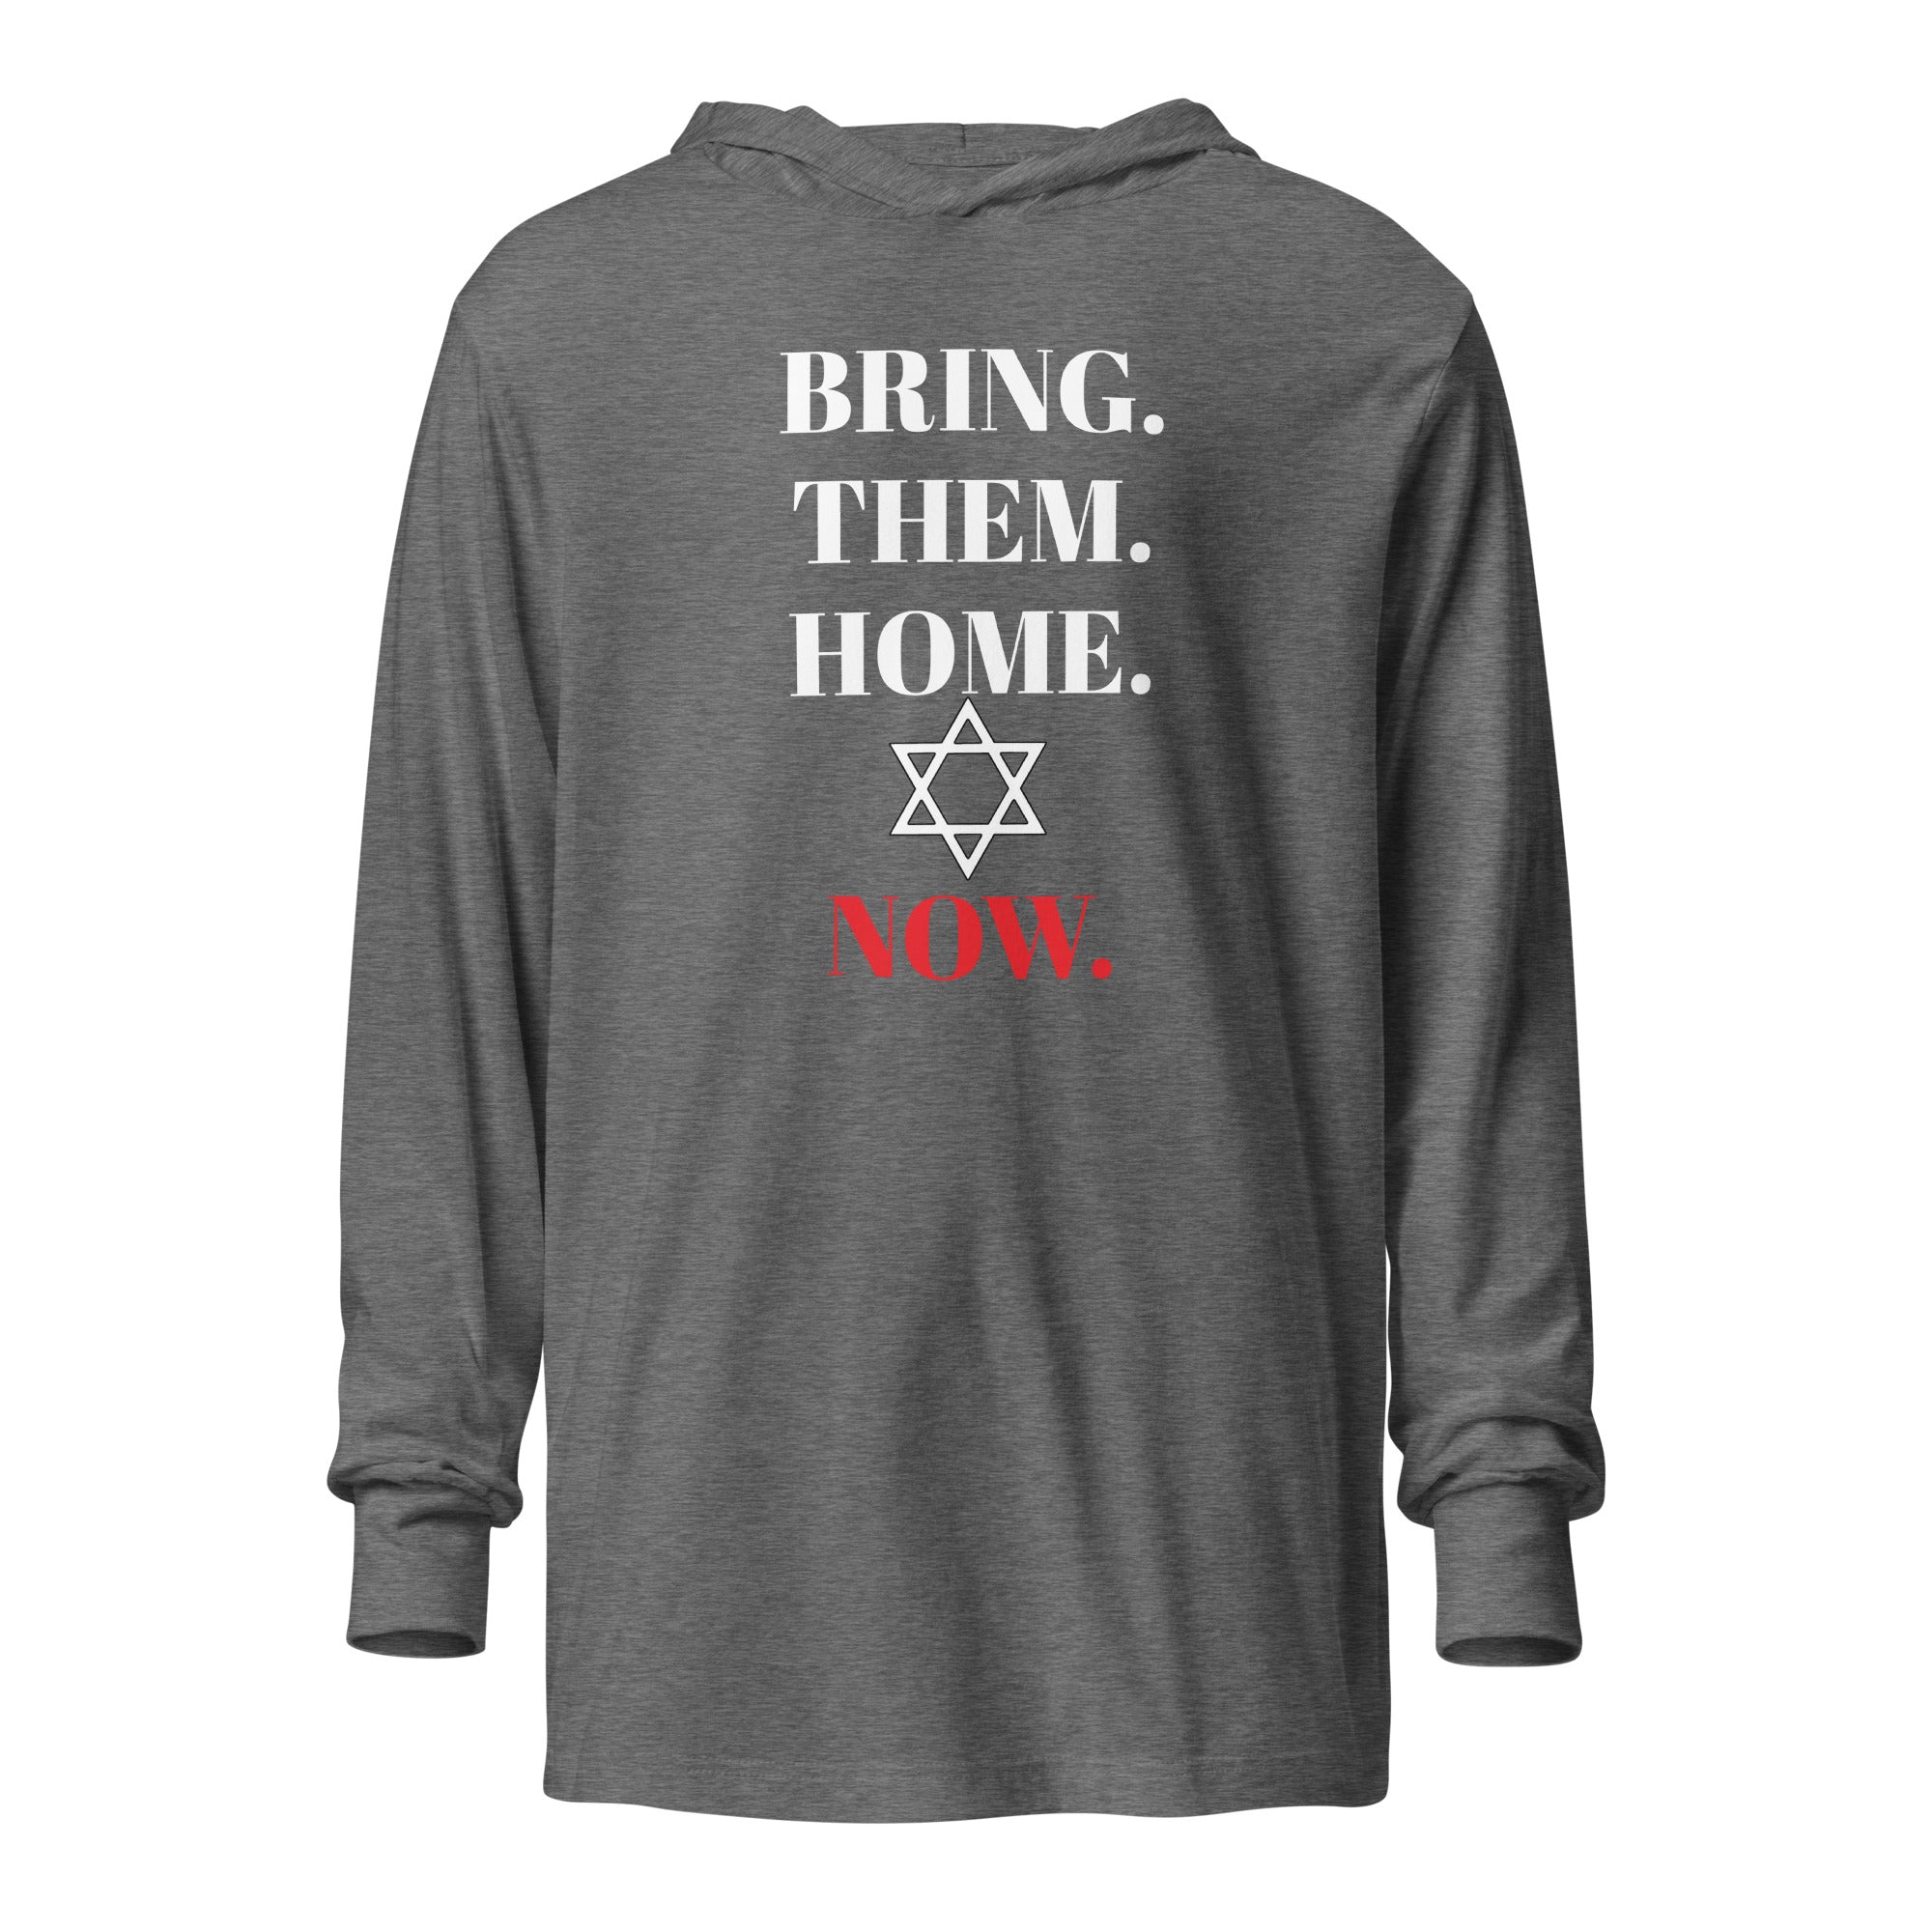 Bring Them Home Now - Hooded long-sleeve tee